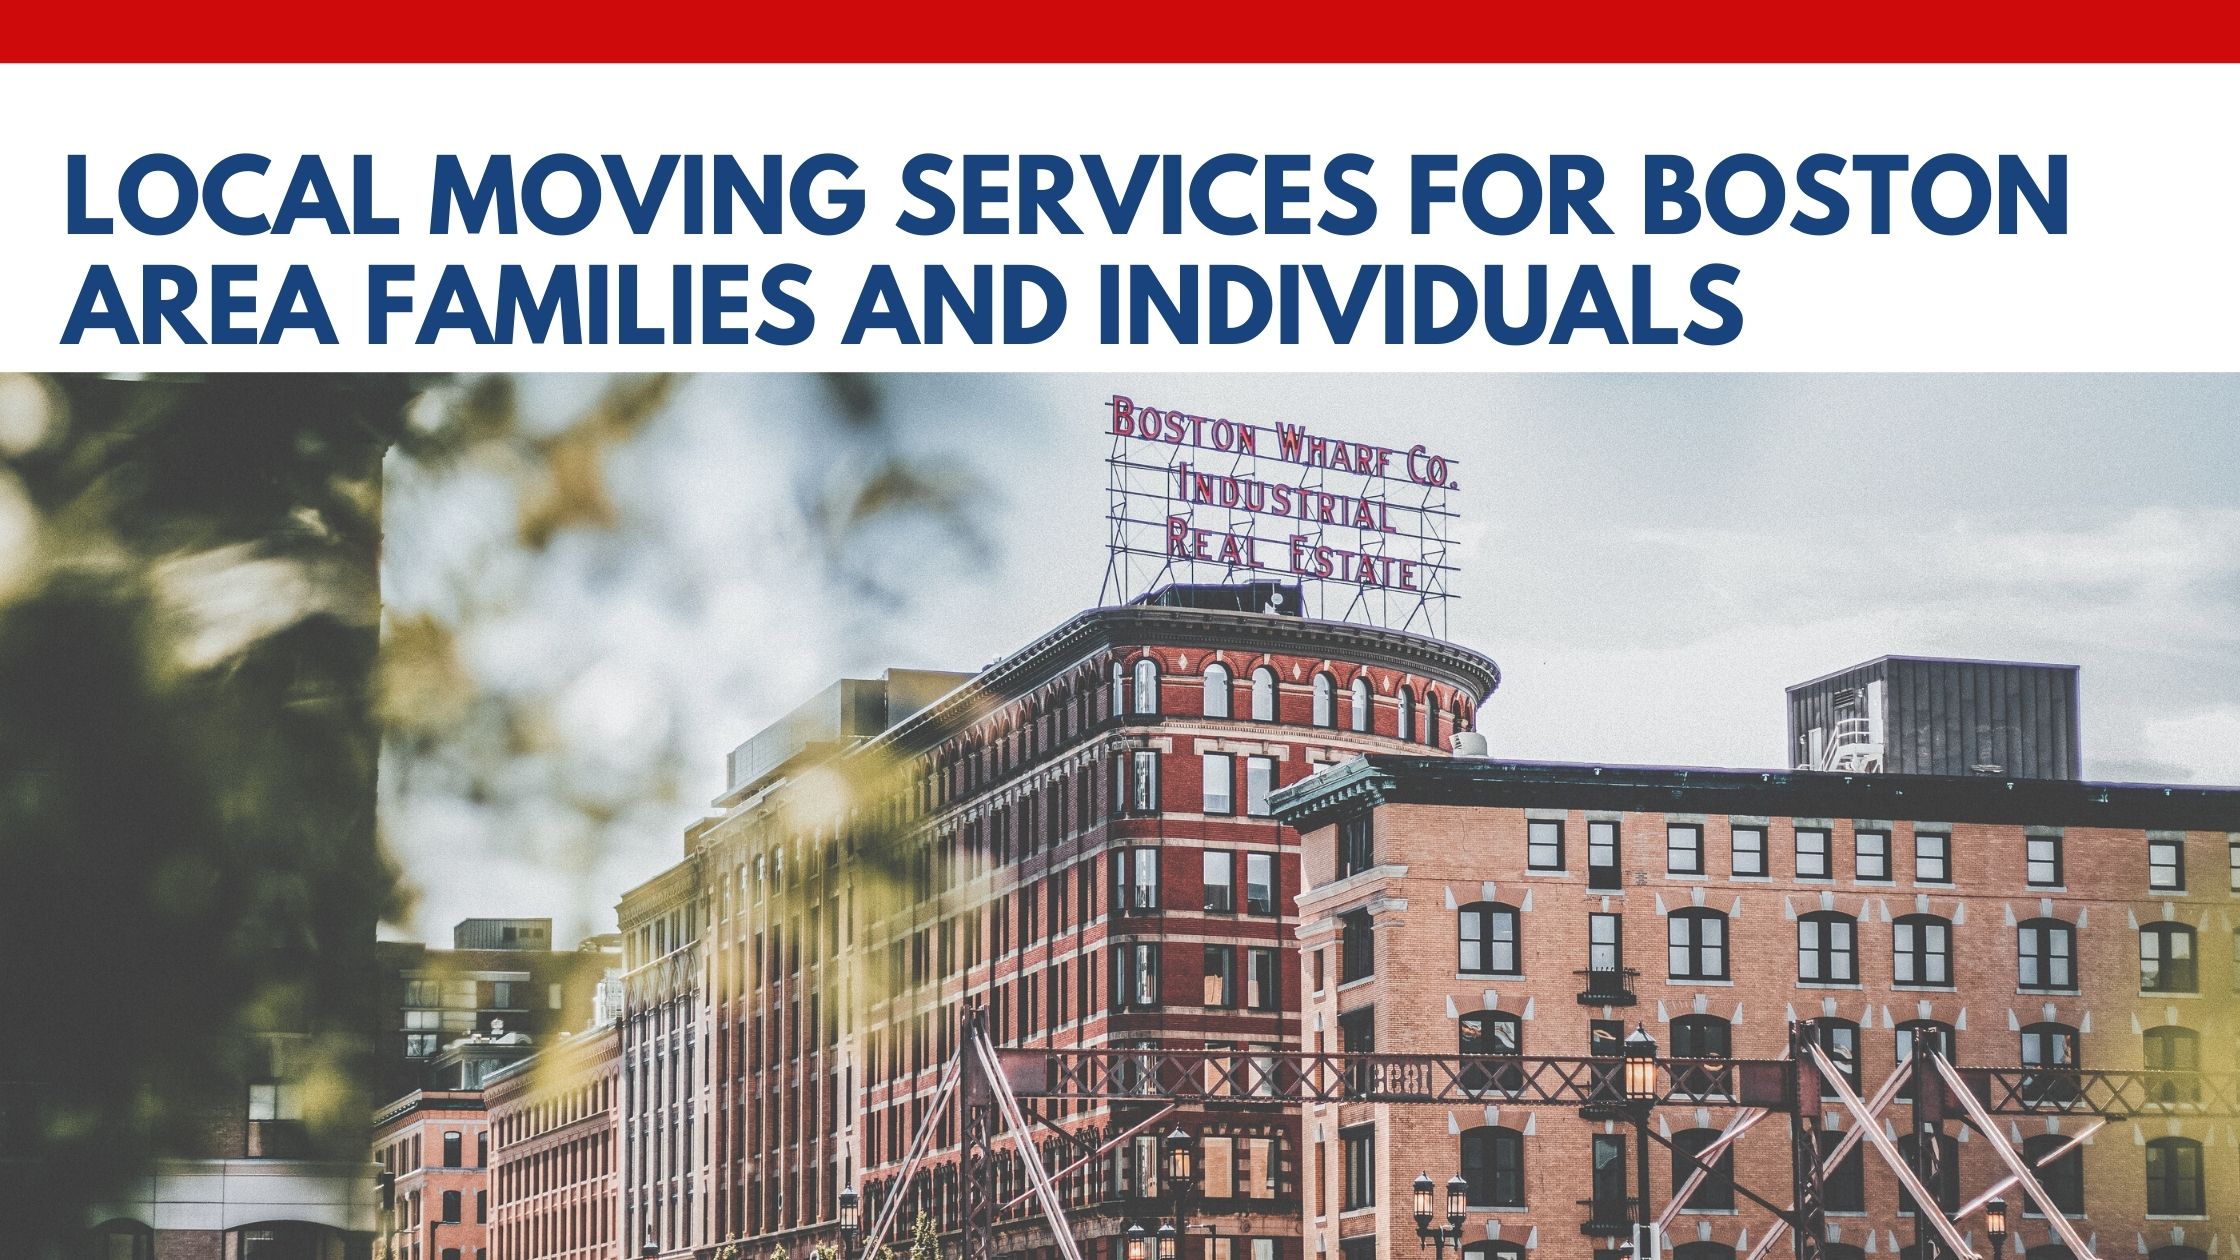 Local Moving Services for Boston Area Families and Individuals